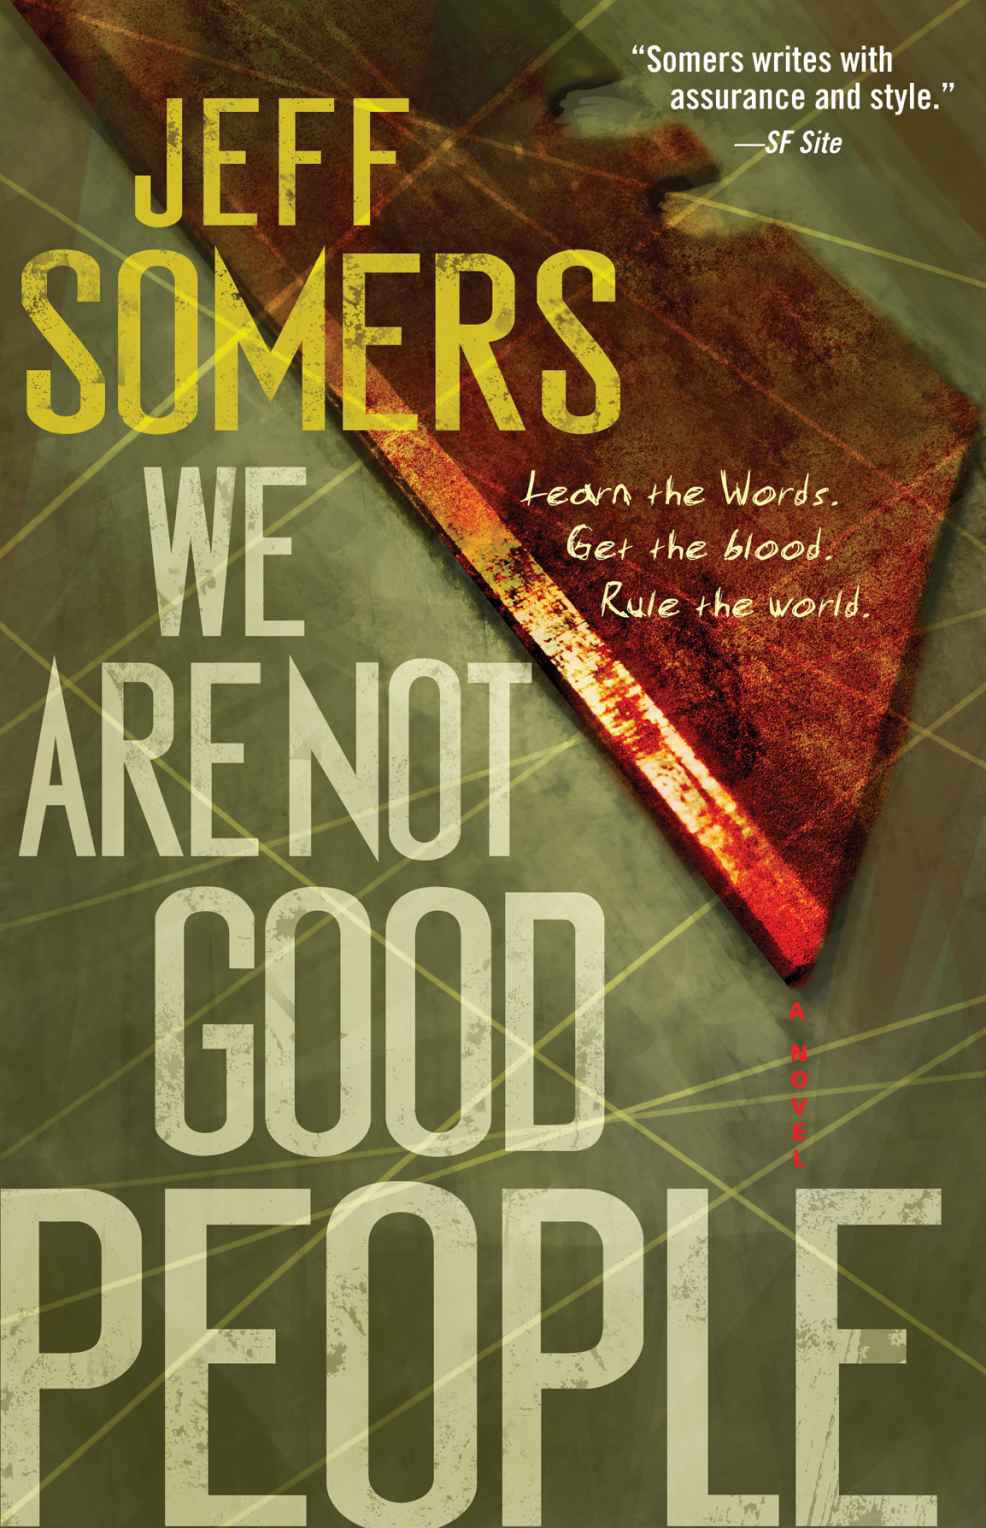 We Are Not Good People (Ustari Cycle) by Jeff Somers